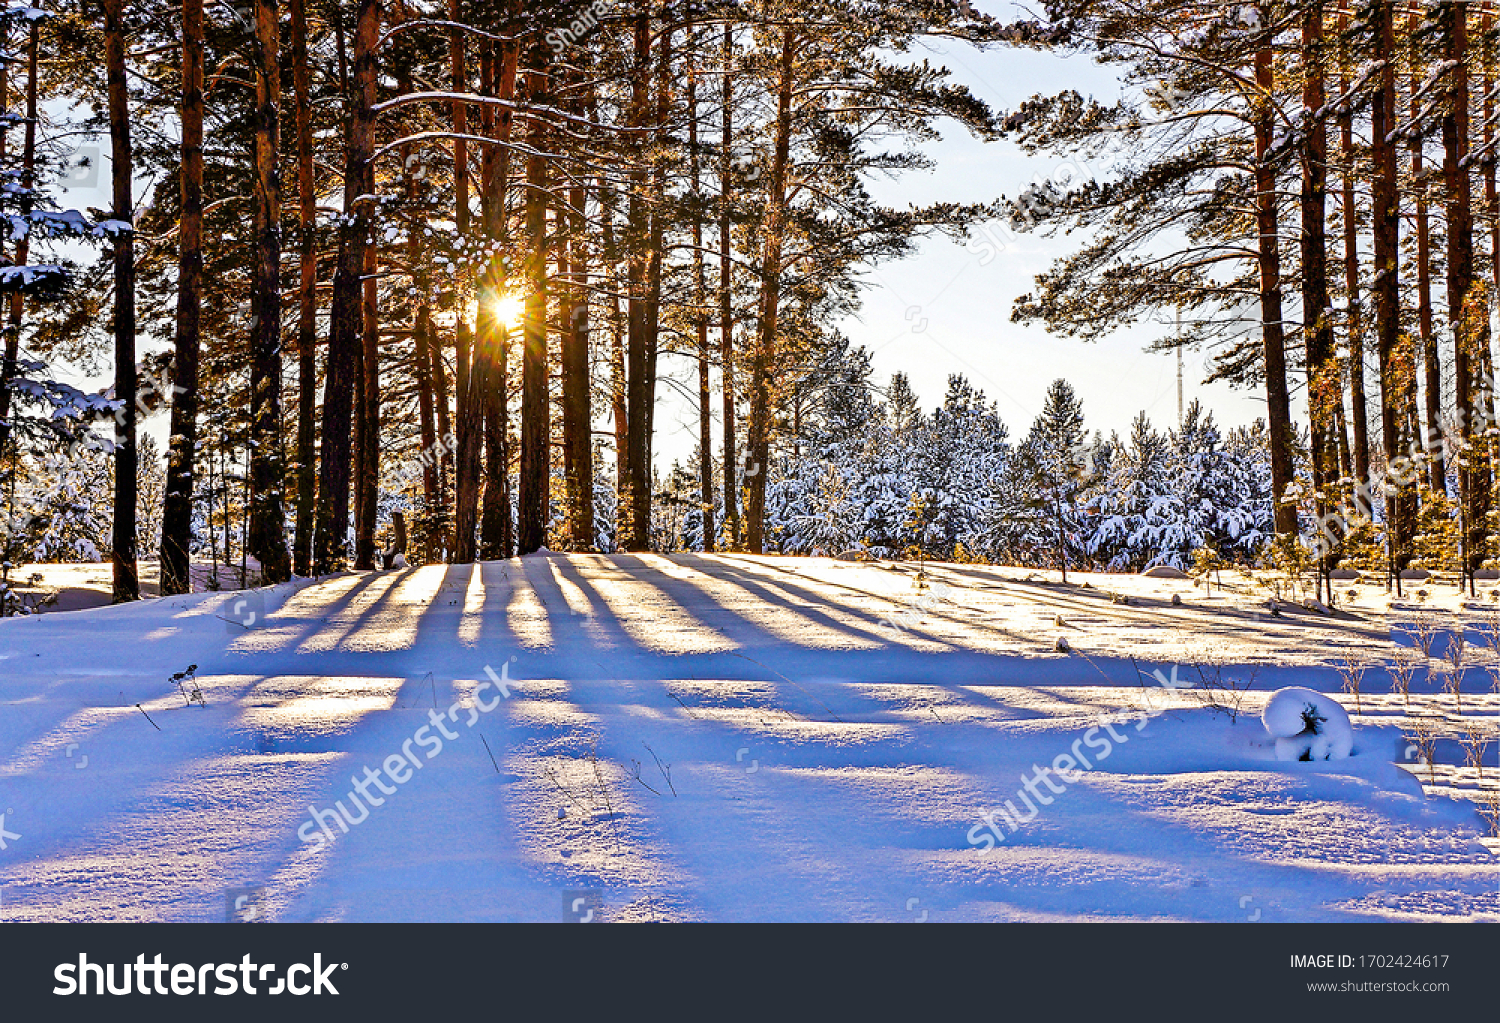 Winter snow sunset forest trees background #1702424617